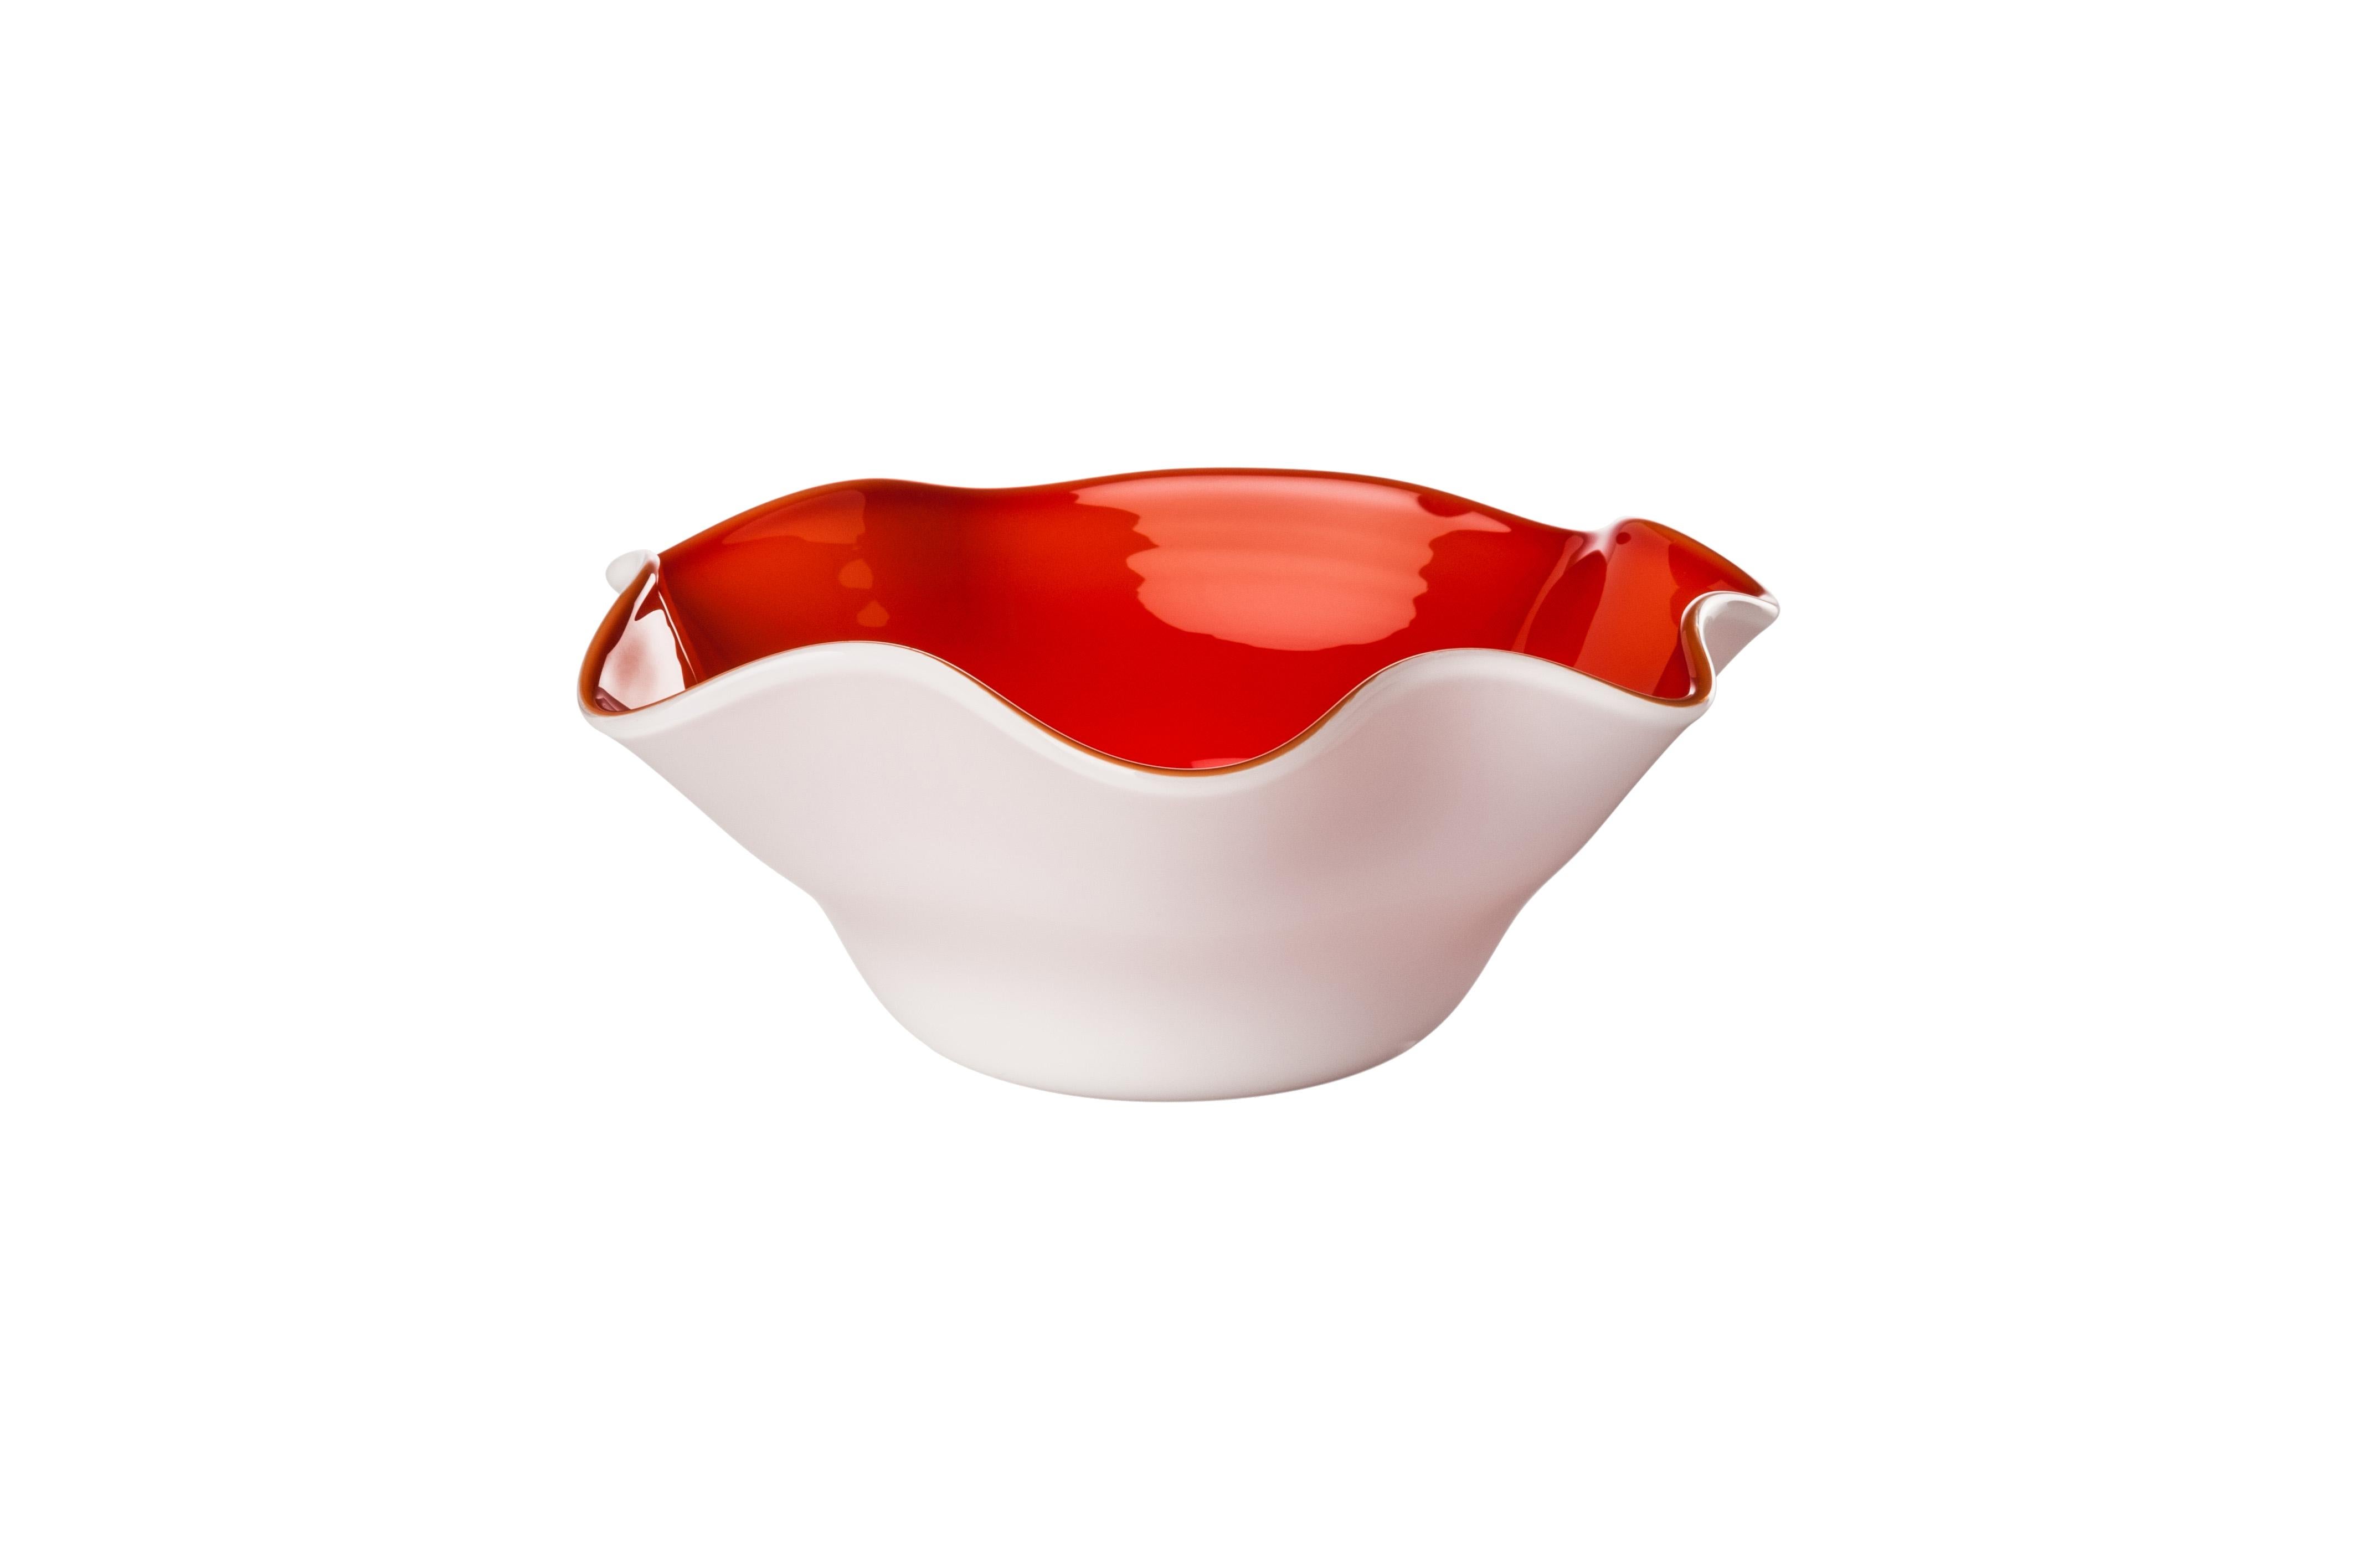 Venini glass bowl with pinched rim in milk-white and red. Perfect for indoor home decor as container, vide-poche or statement piece for any room. Also available in other colors on 1stdibs.

Dimensions: 18 cm diameter x 7.5 cm height.